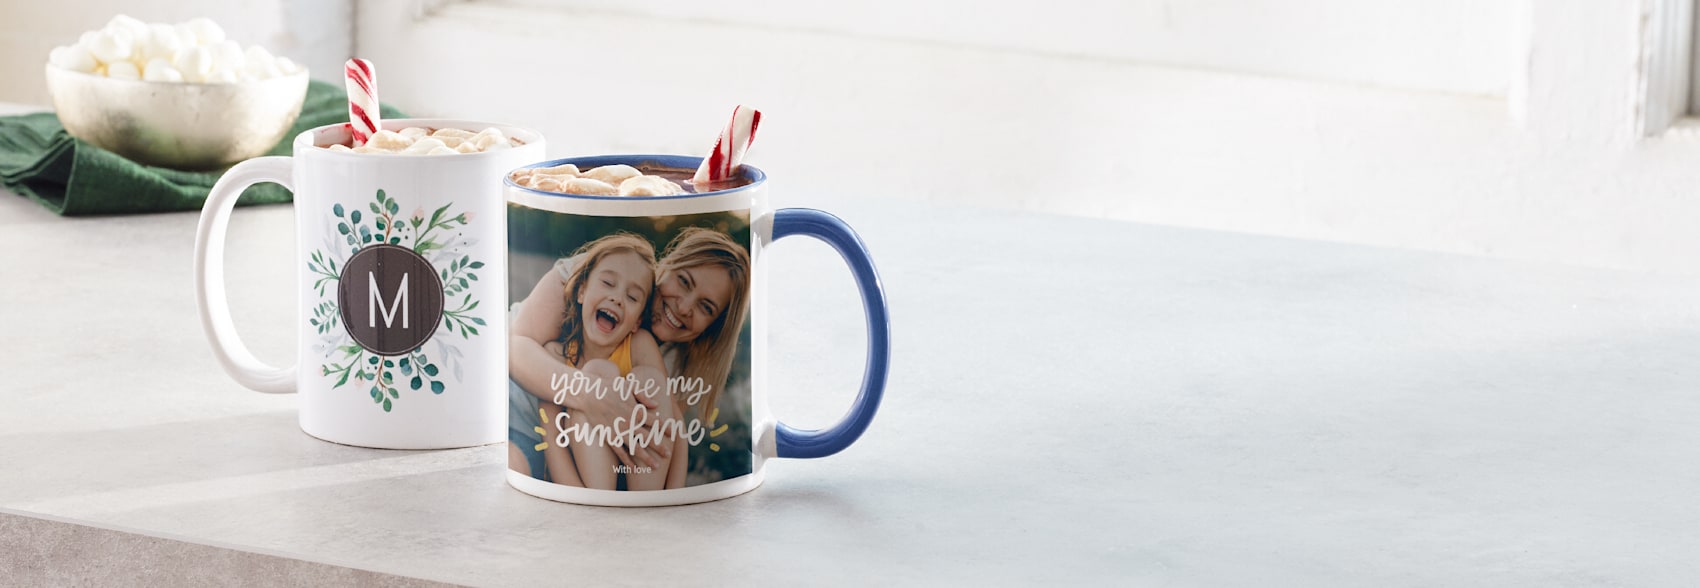 Friends Personalized Coffee CupDisplay Your Own Photo In Frame20 Ounces 